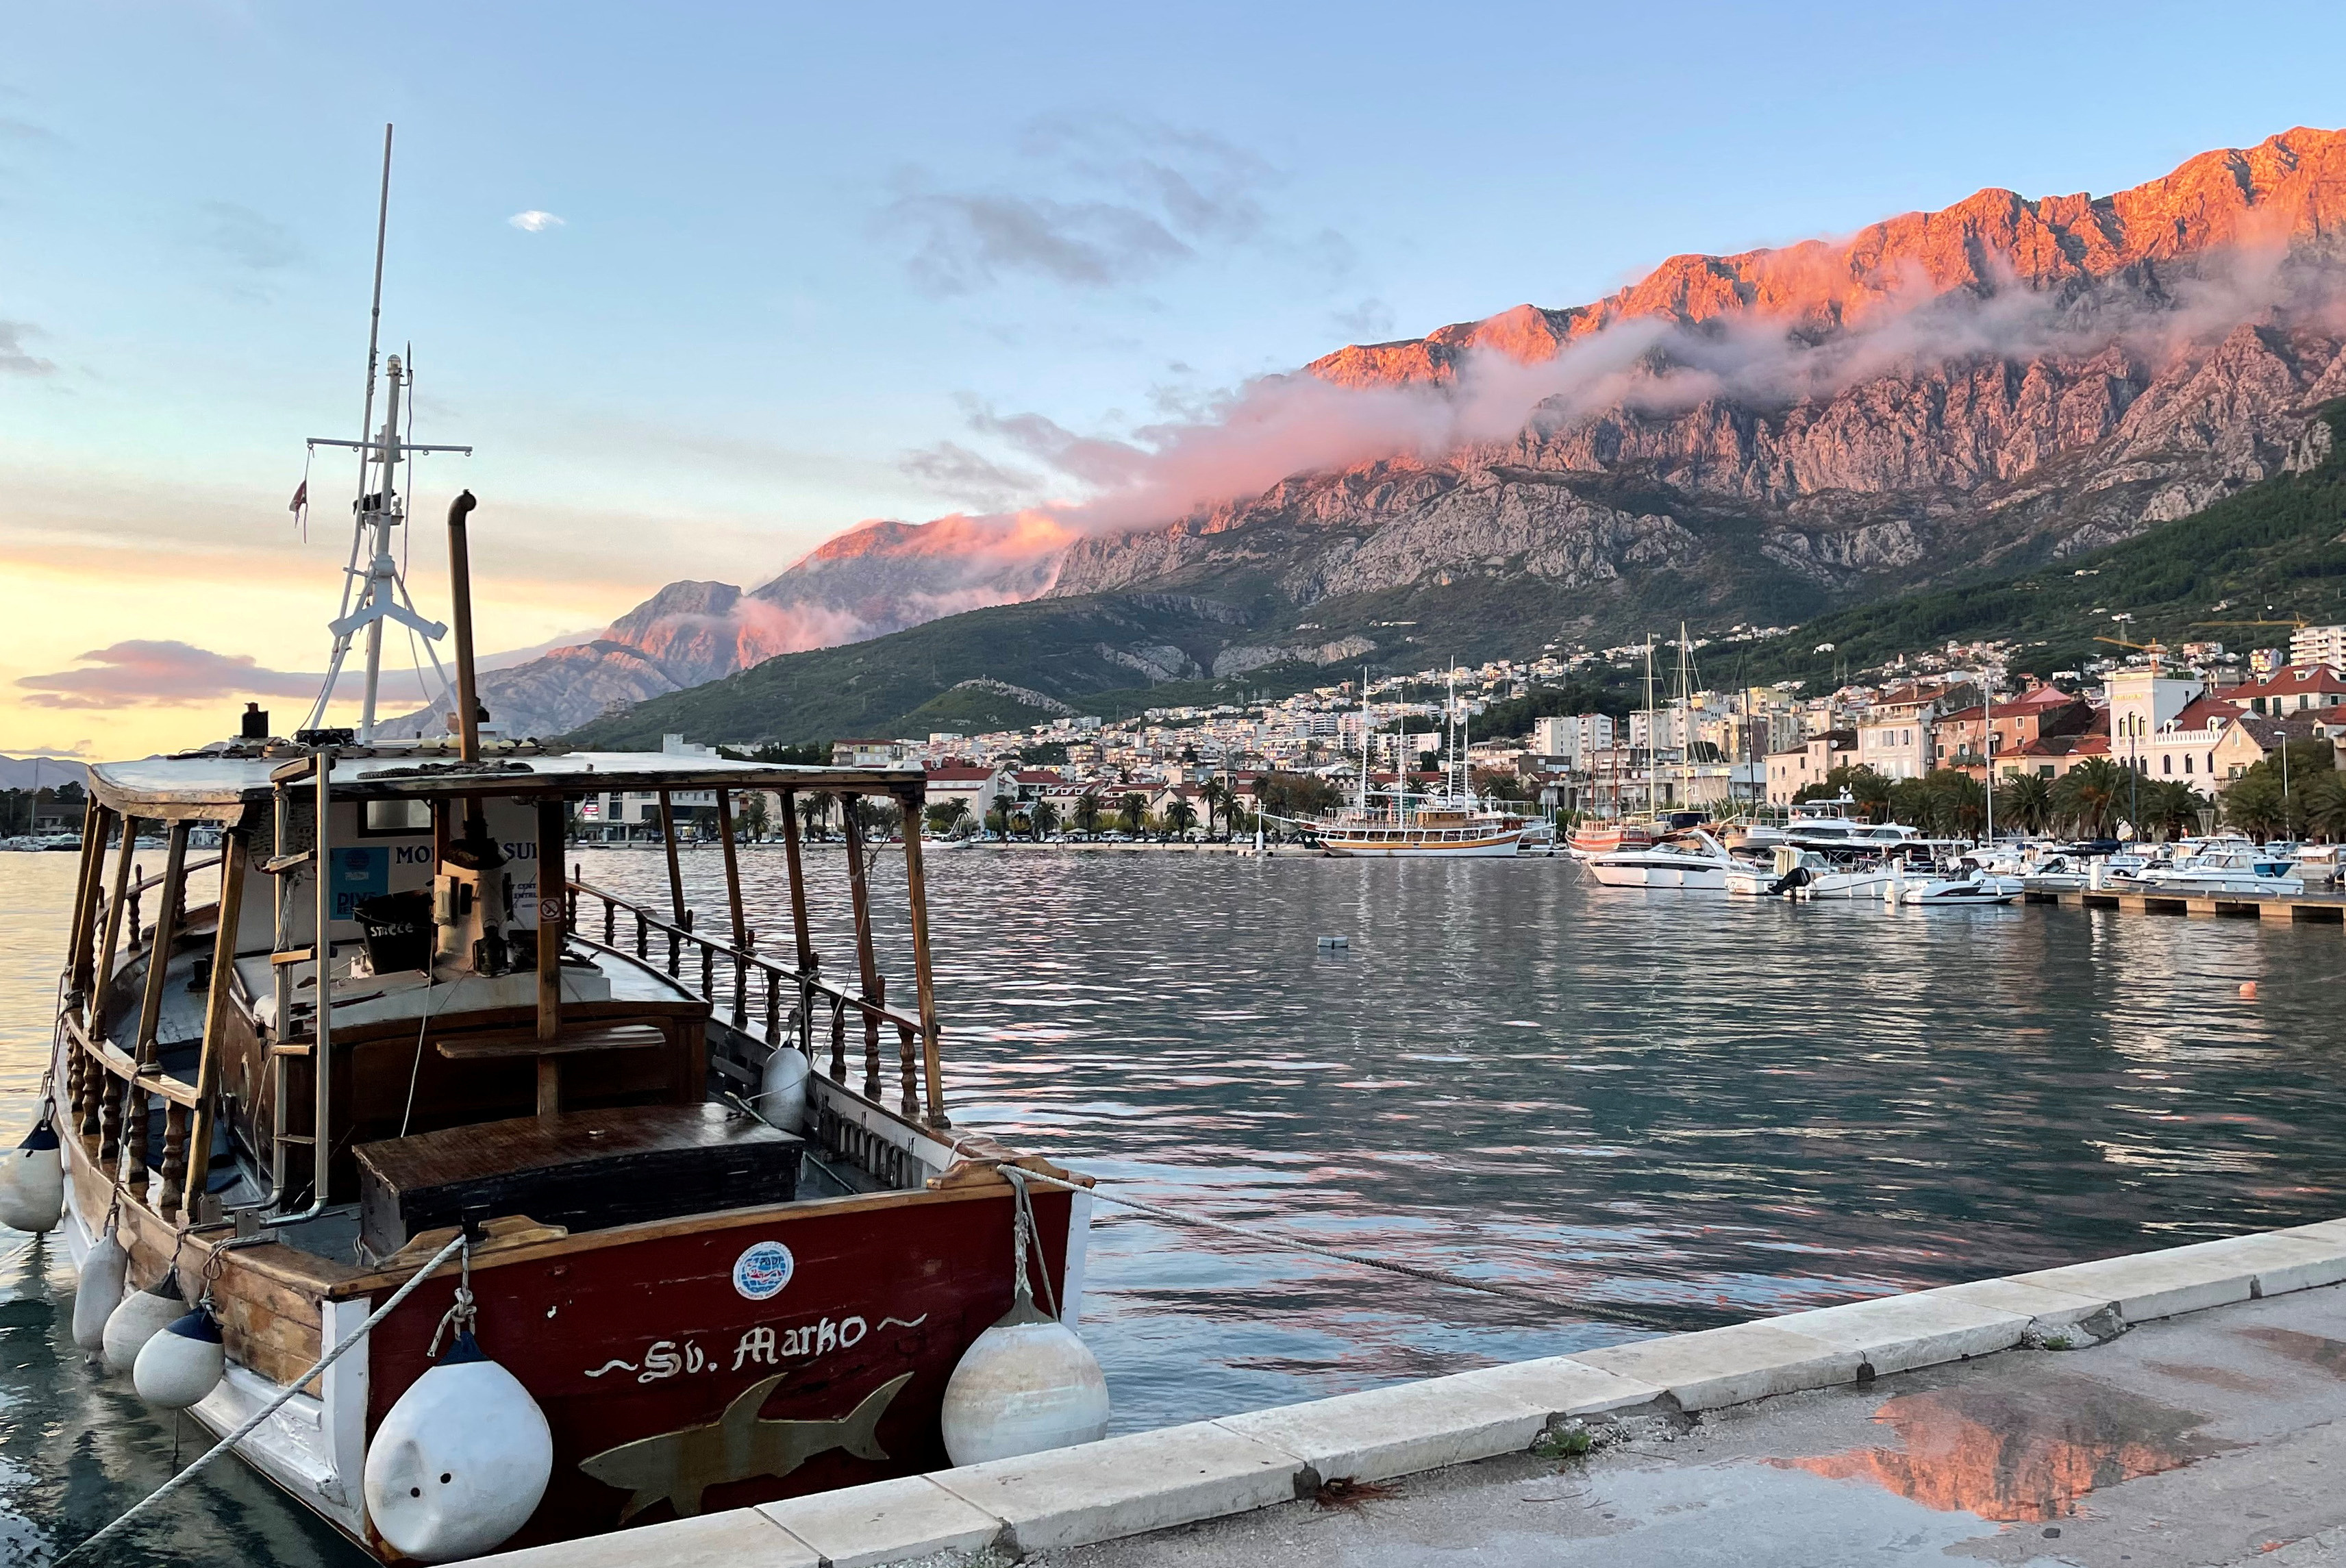 Most hotels on the Croatian Adriatic coast closed ahead of the winter season due to the rise in the prices of energy and food, triggered by the war in Ukraine, In Makarska